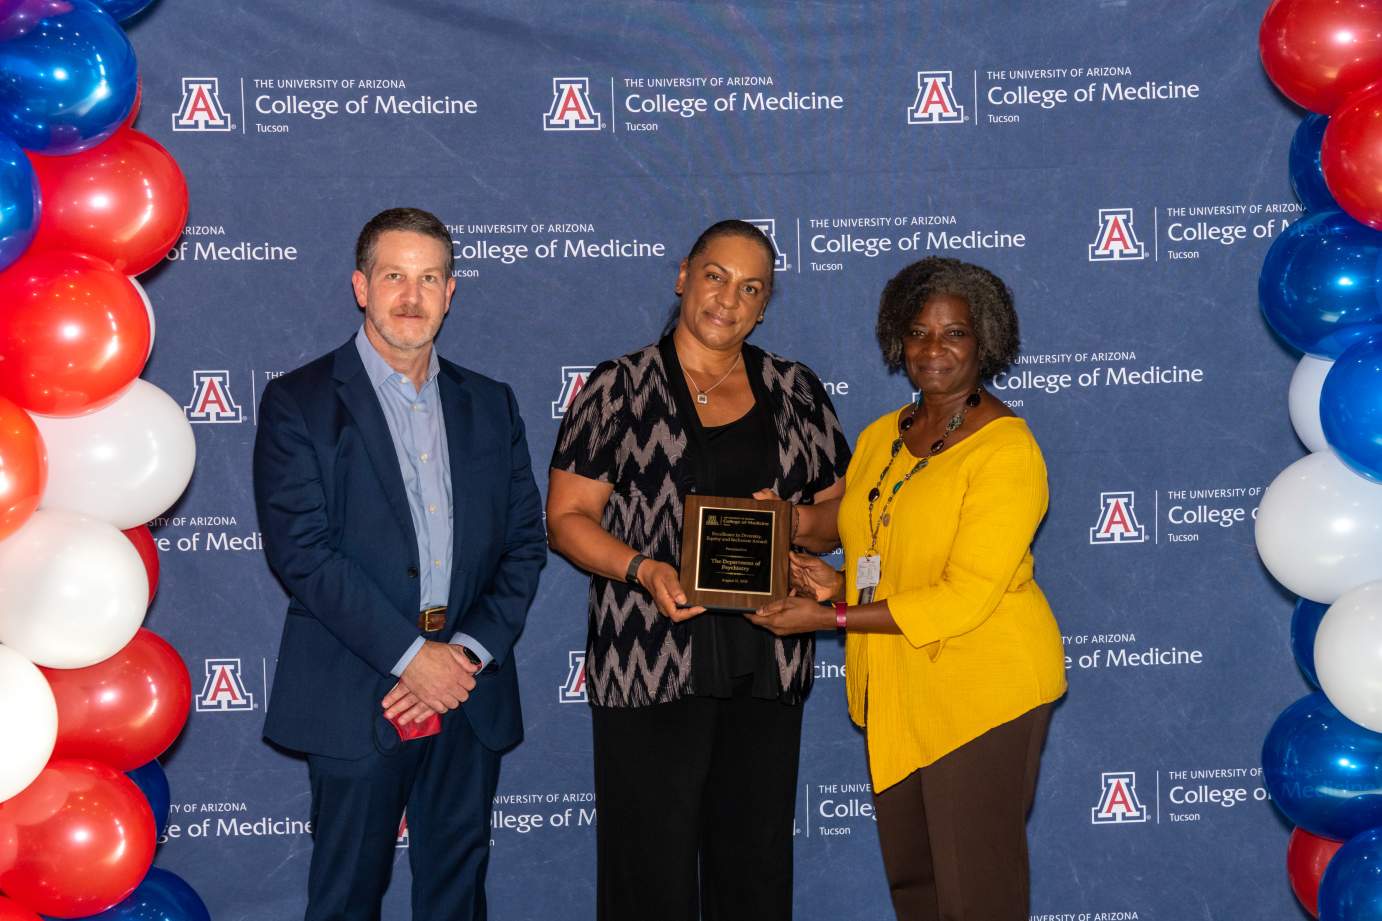 [Dr. Jordan Karp and Dr. Patricia Harrison-Monroe accept the Awards for Excellence in Diversity, Equity, and Inclusion for the Department of Psychiatry presented by Dr. Victoria Murrain.]